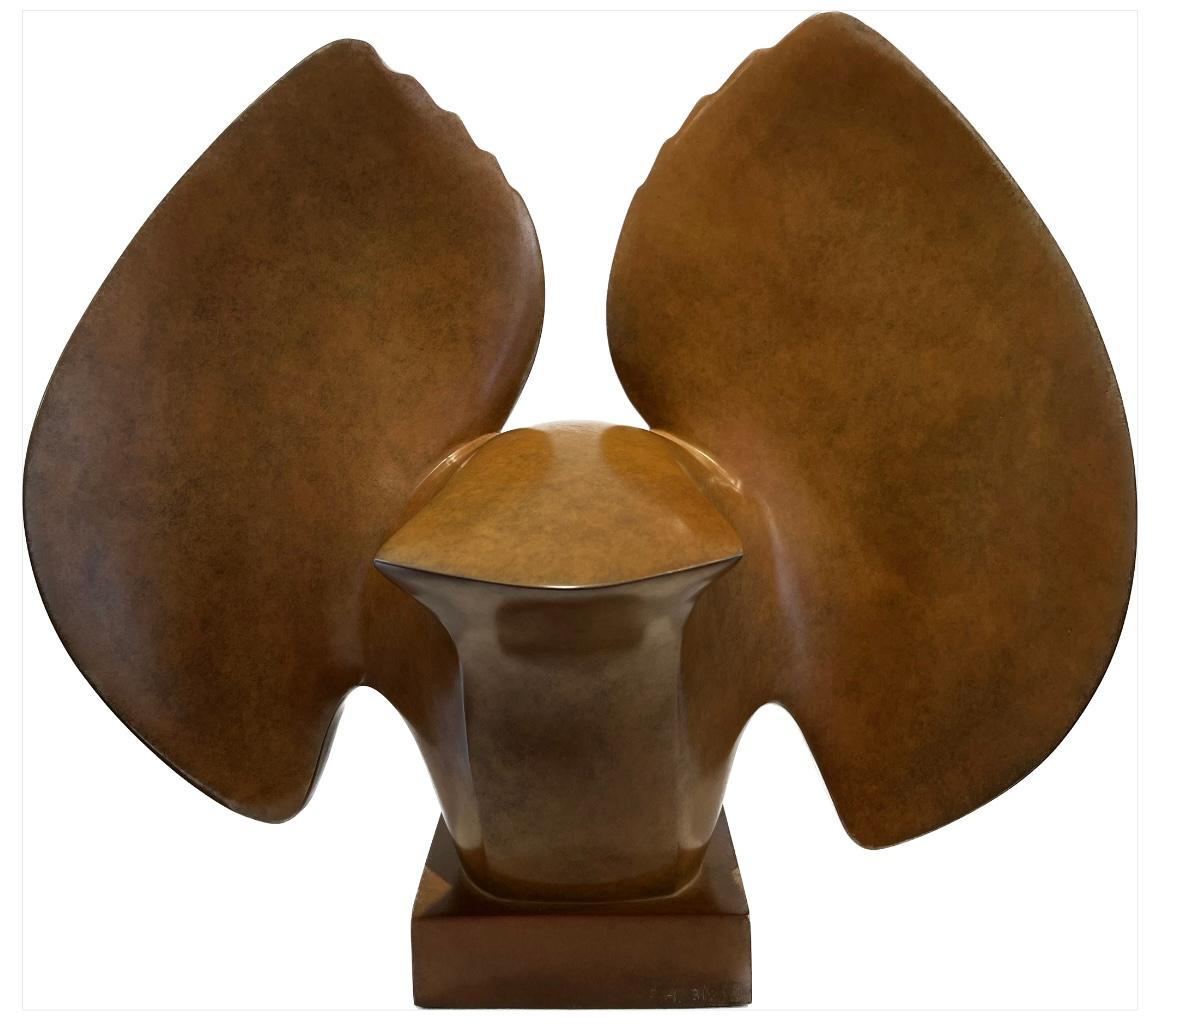 Landende Uil no. 5 - 2023 Landing Owl Bronze Sculpture Animal Bird  In Stock Limited Edition Brown Patina
Evert den Hartog (born in Groot-Ammers, The Netherlands in 1949) followed his education to be a sculptor at the Rotterdam Academy of Visual